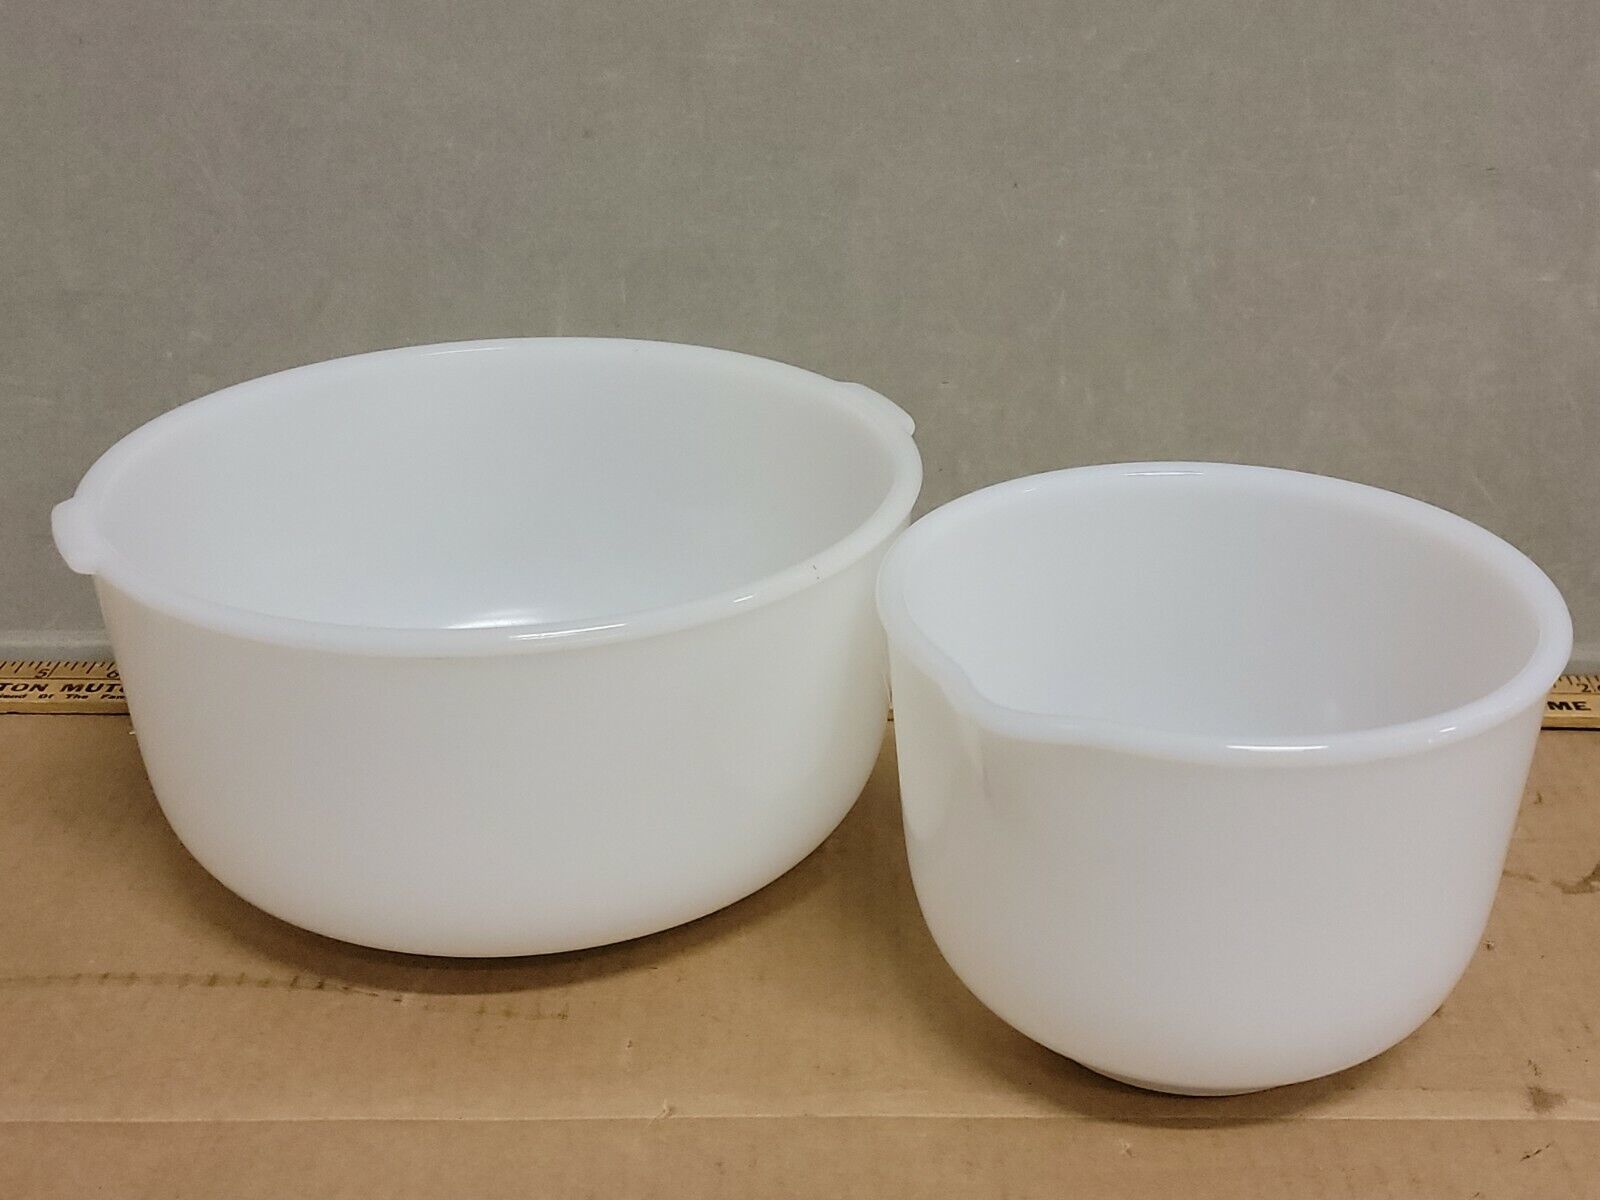 Primary image for Sunbeam Glasbake Milk Glass Mixing Bowls 19CJ & 20CJ see pictures Flea bites